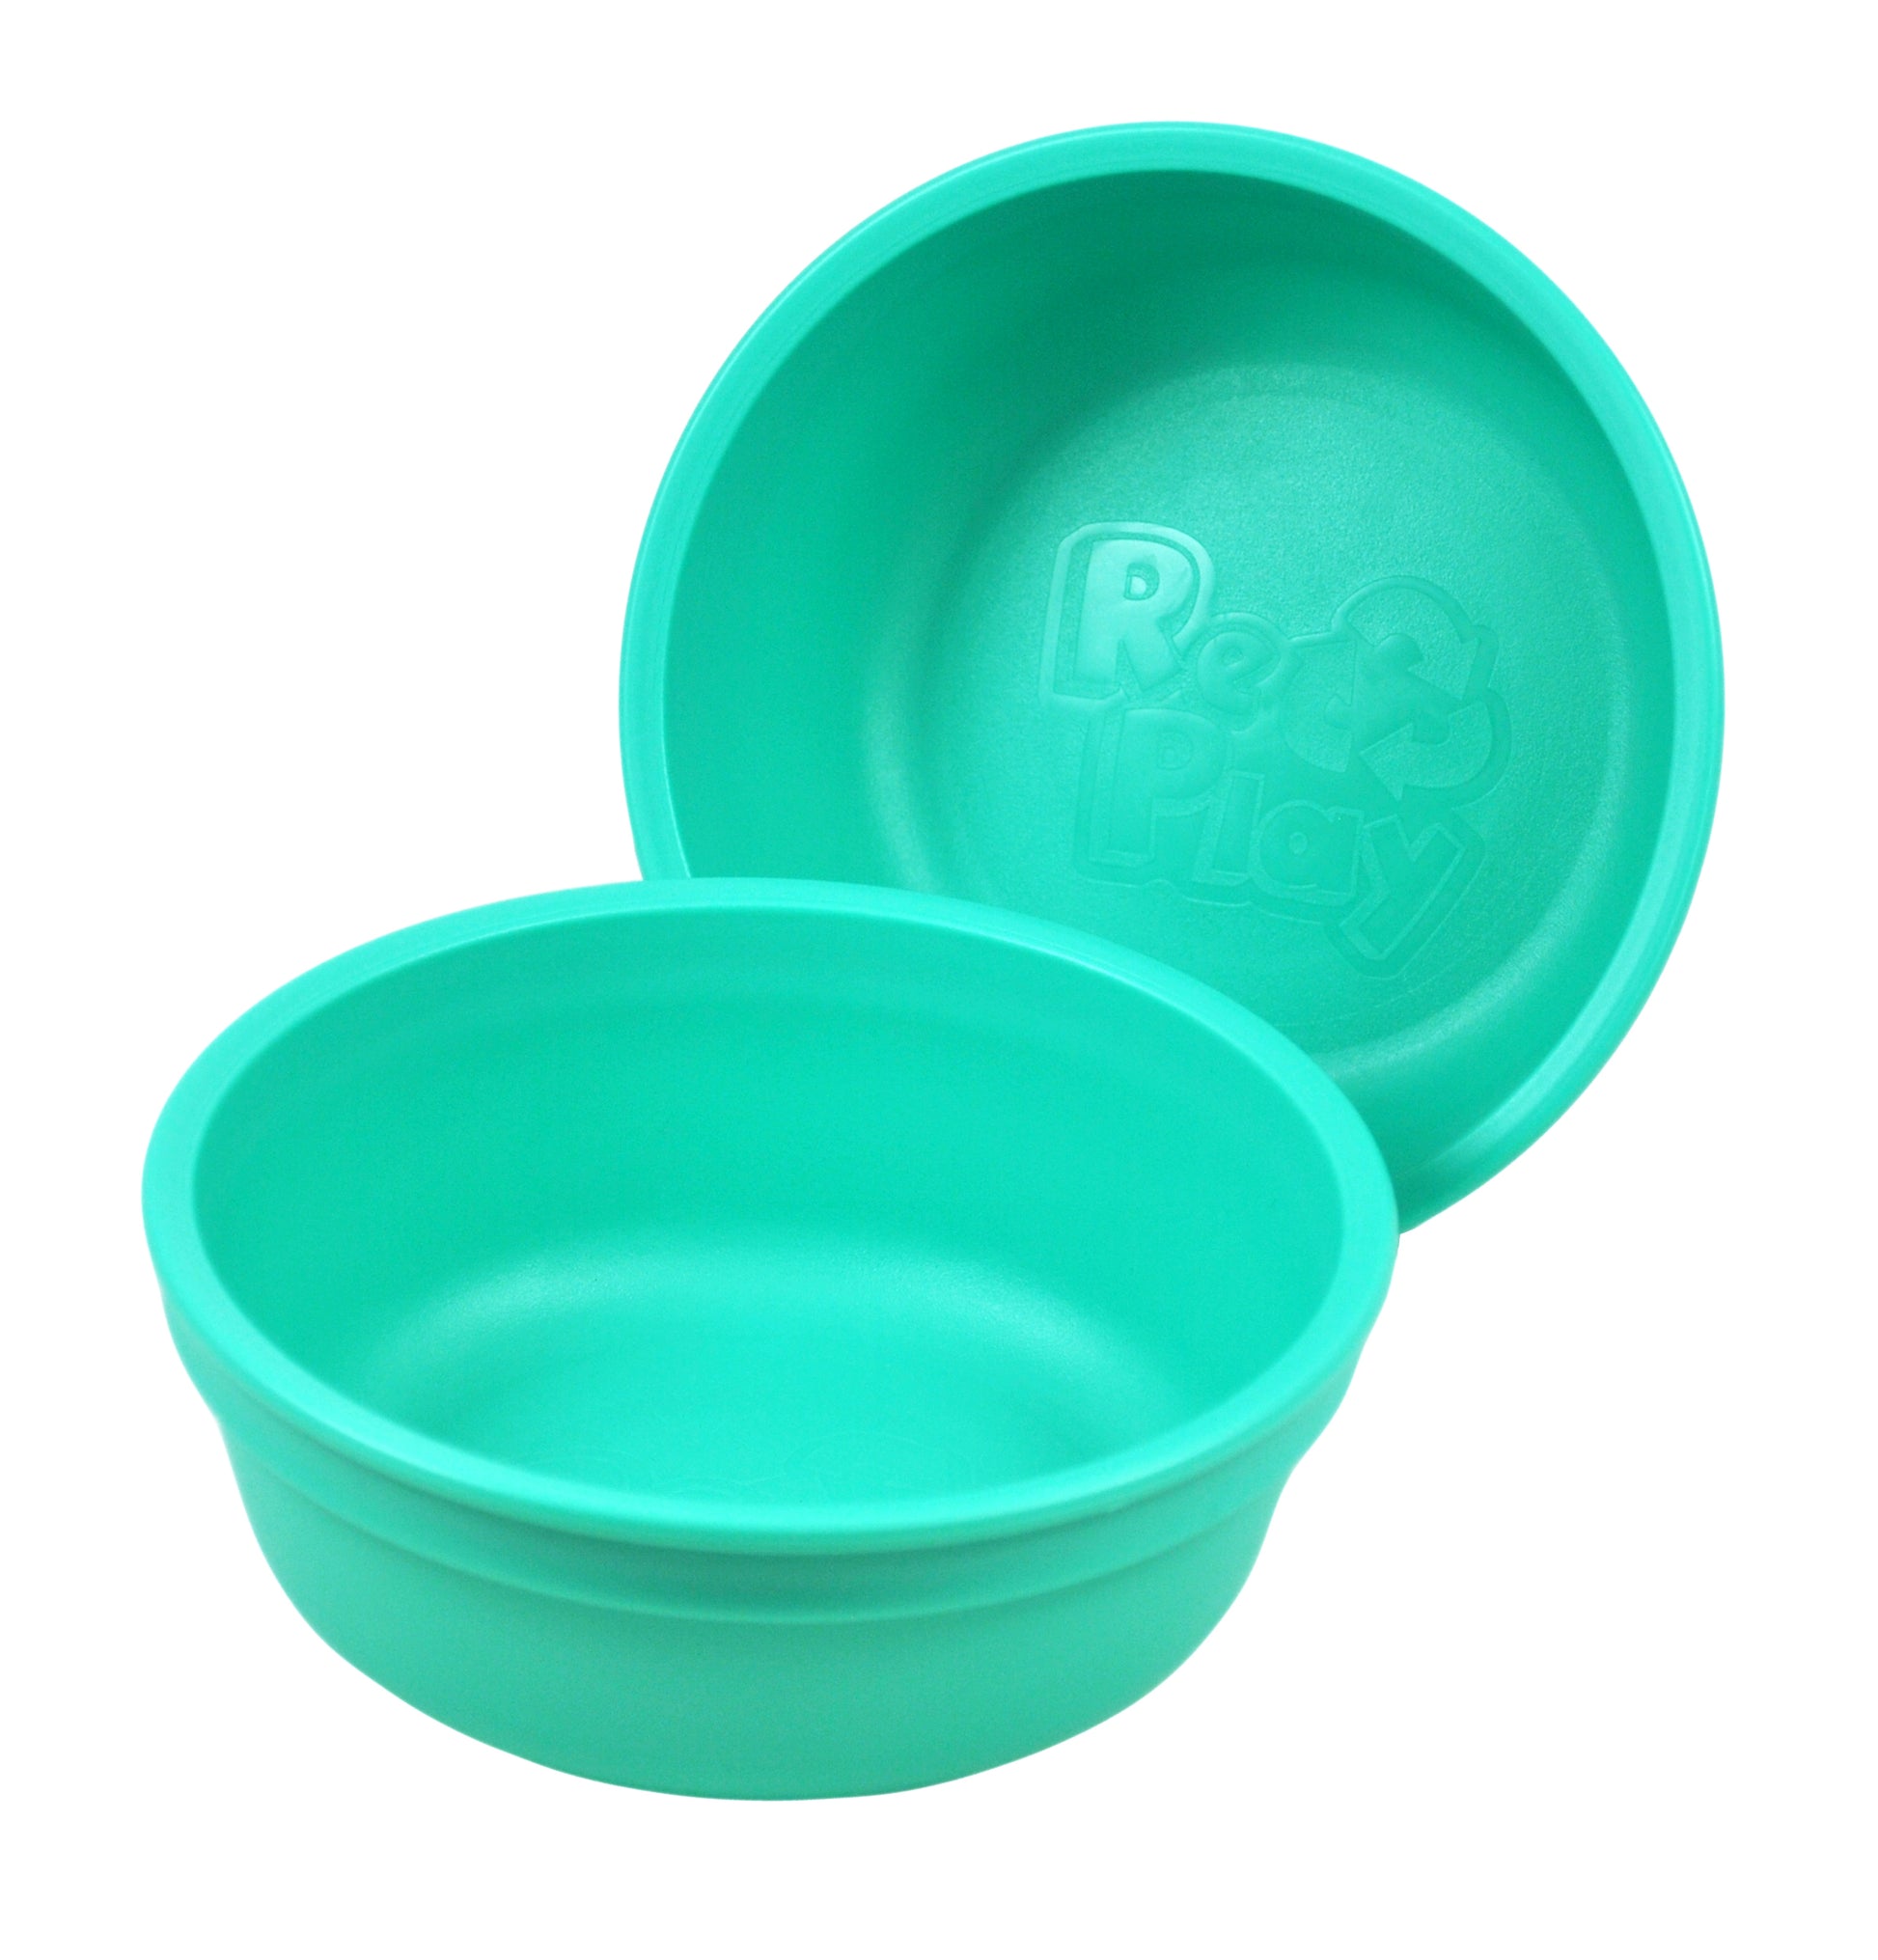 Re-Play Bowl | Standard Size in Aqua from Bear & Moo